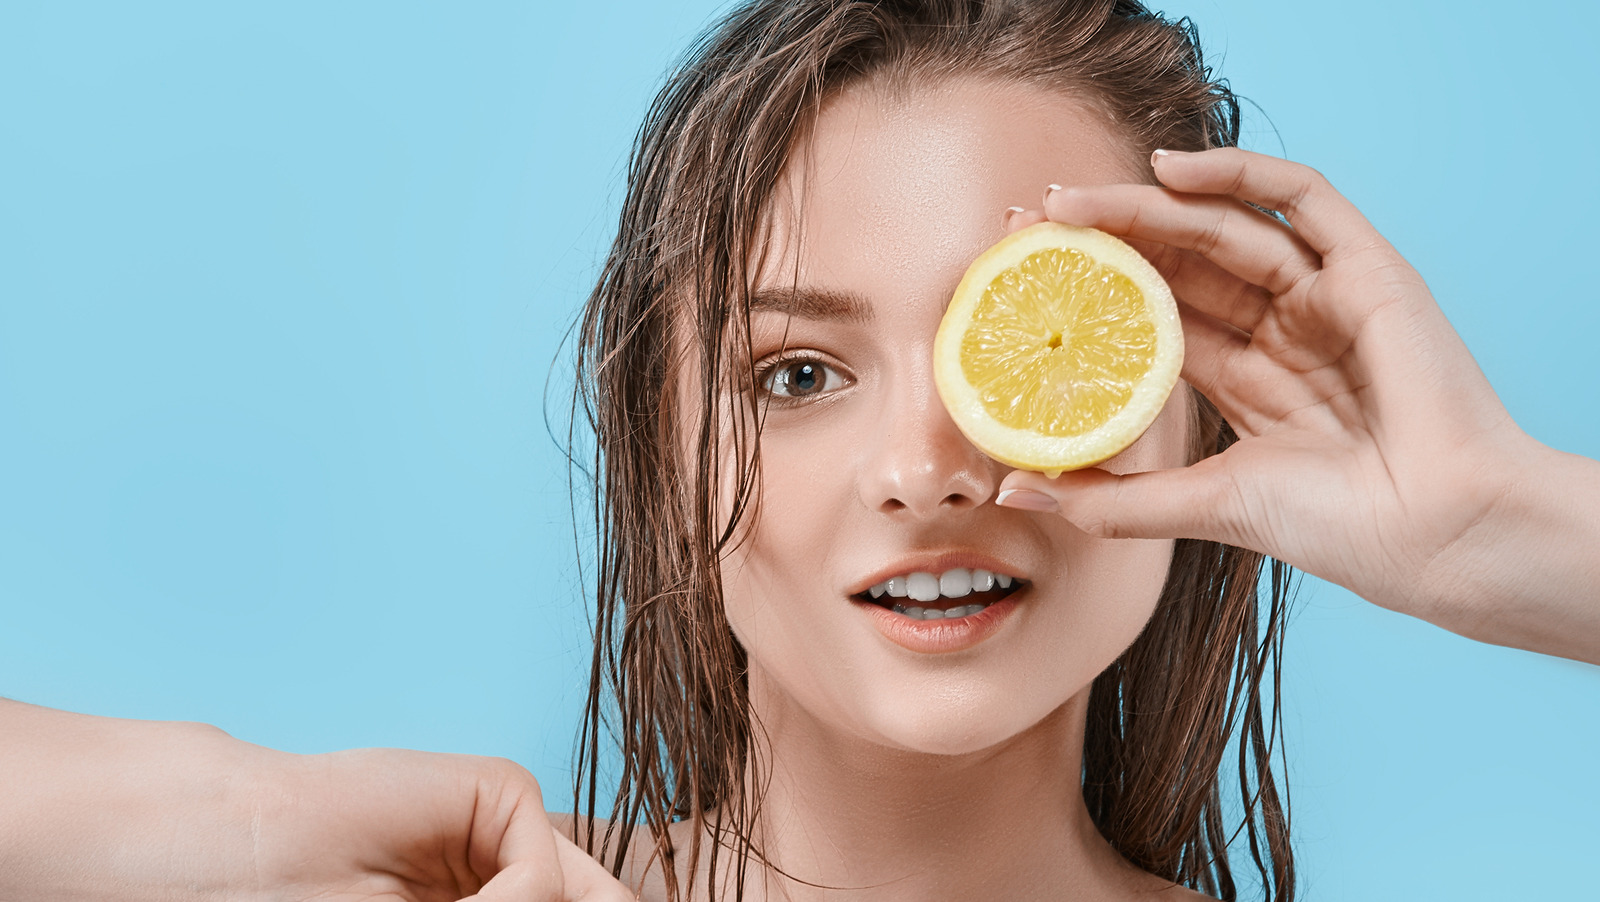 Can You Really Lighten Your Hair With Lemon Juice?